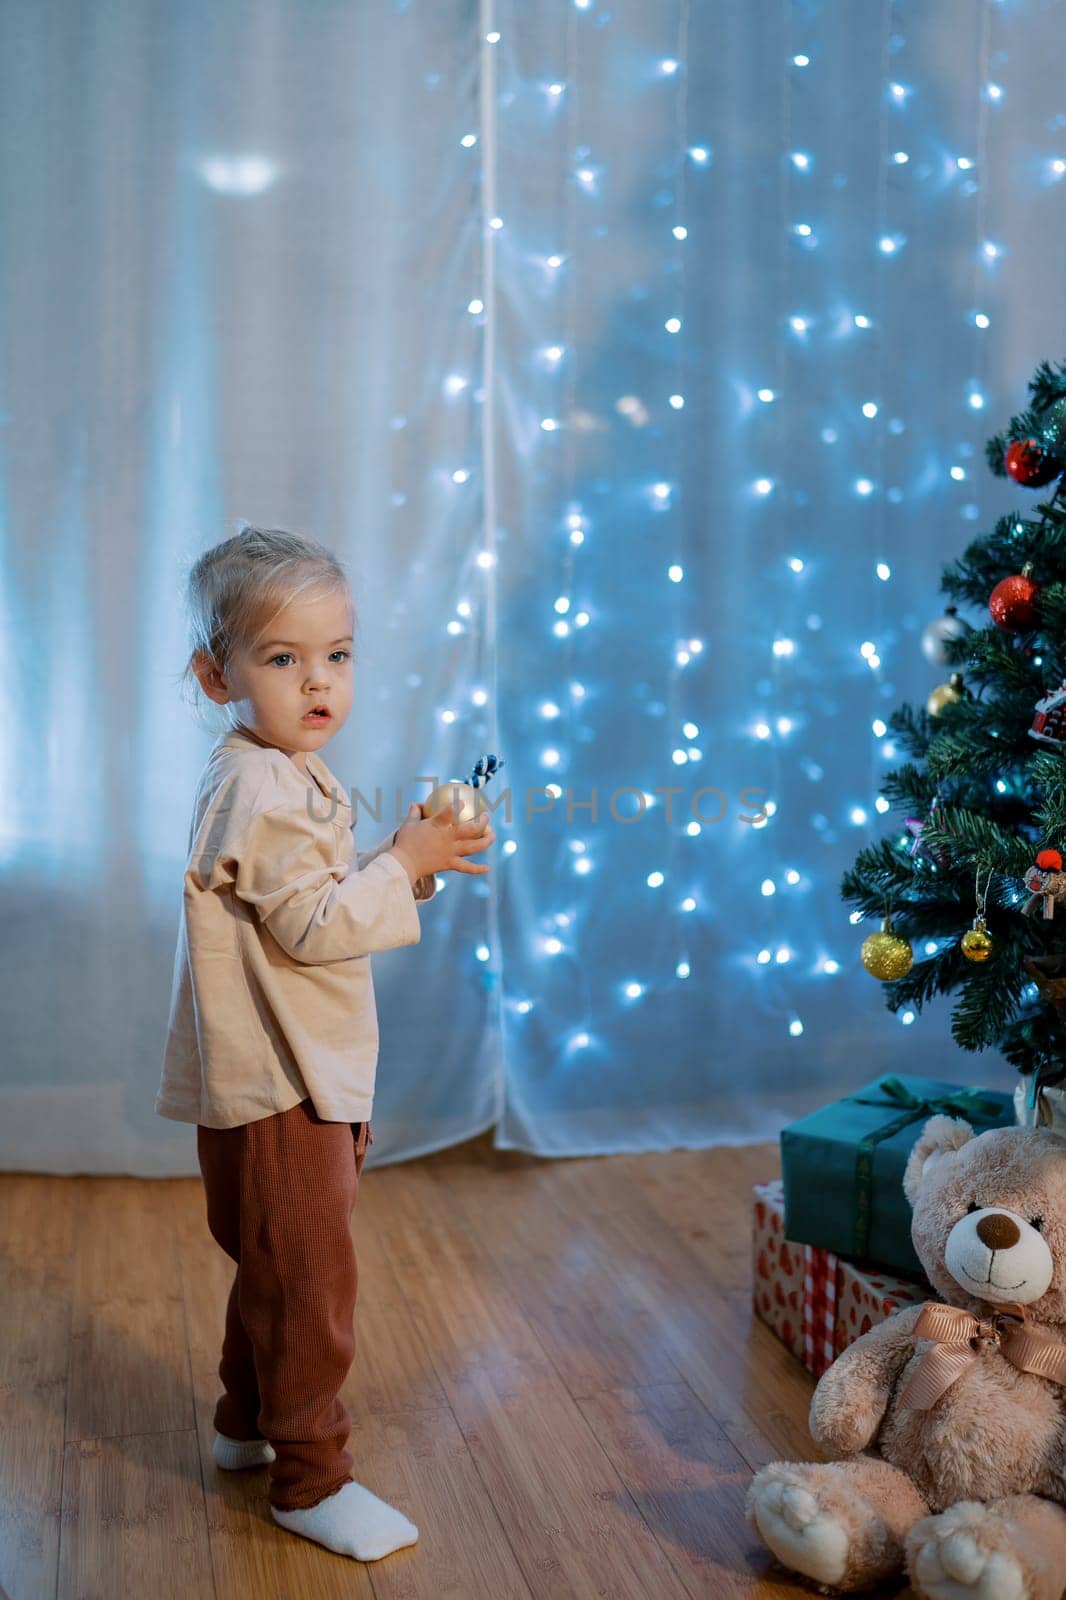 Little girl stands near a decorated Christmas tree with a ball in her hands. High quality photo